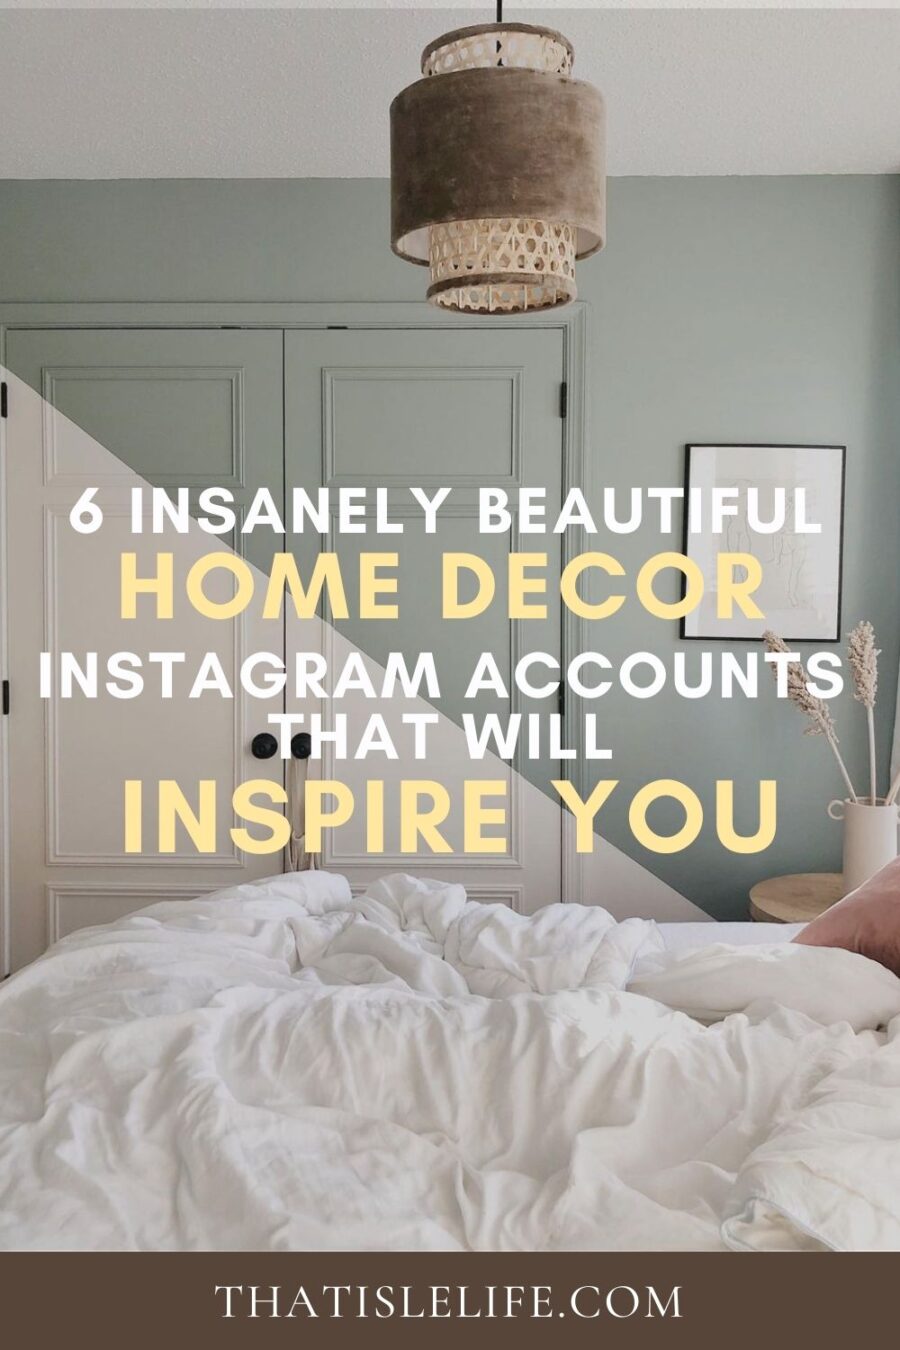 6 Insanely Beautiful Home Decor Instagram Accounts That Will Inspire ...